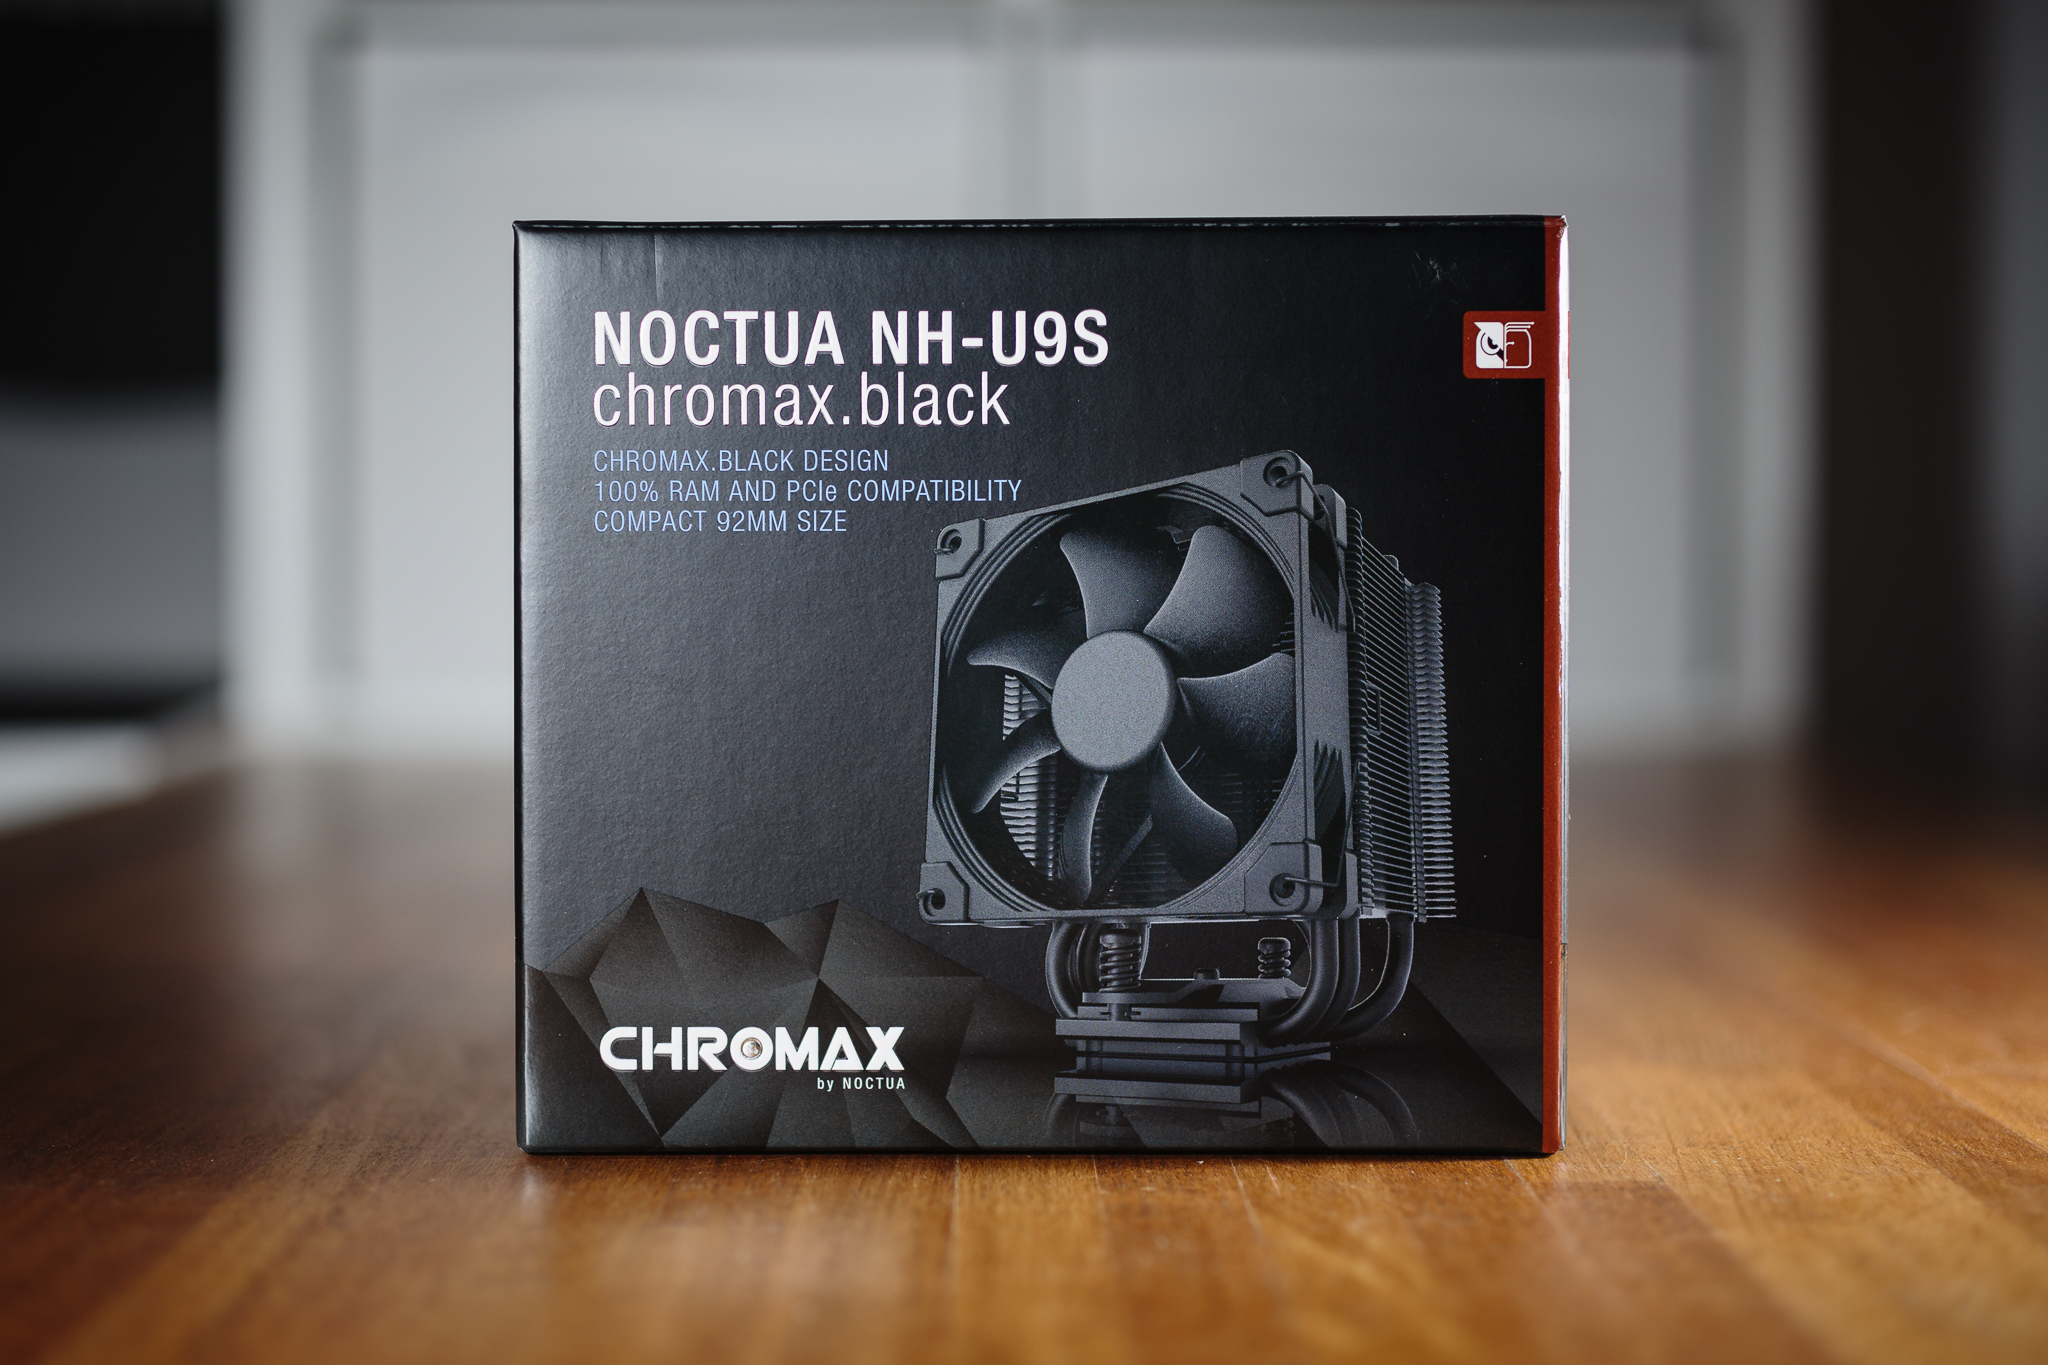 Noctua NH-U9S chromax.black – Small, quiet and very expensive